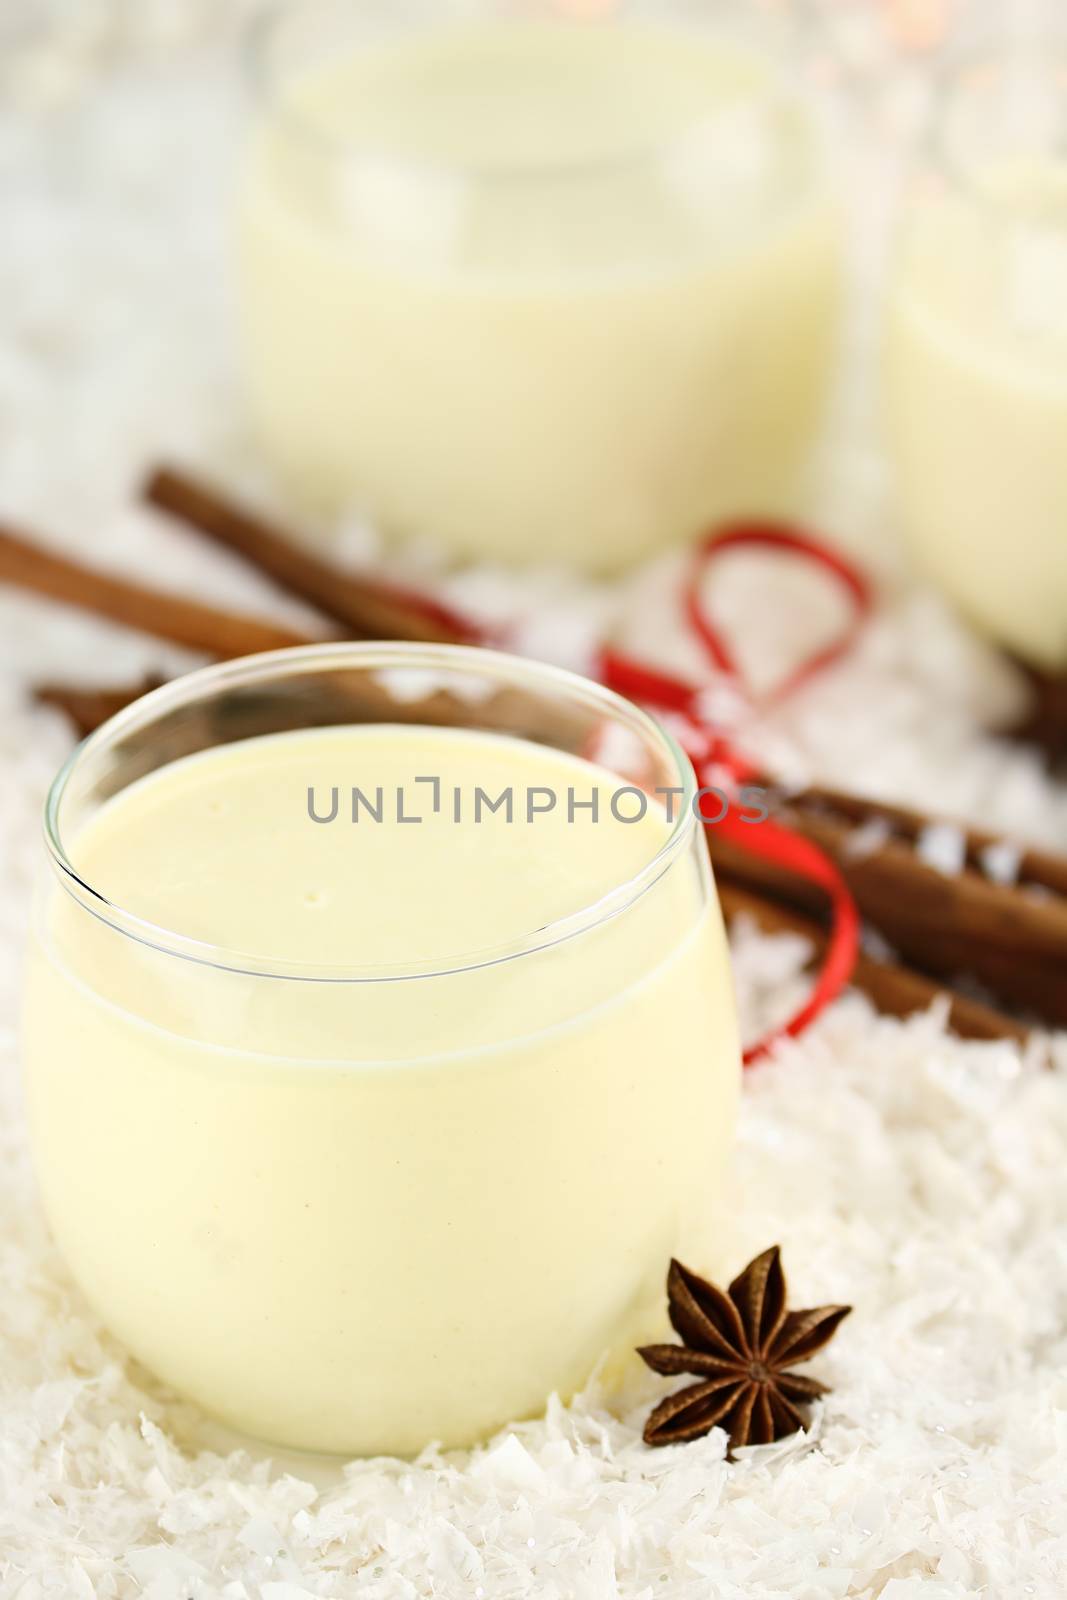 Fresh eggnog with cinnamon sticks and star of anise ready for the Christmas season. Extreme shallow depth of field.